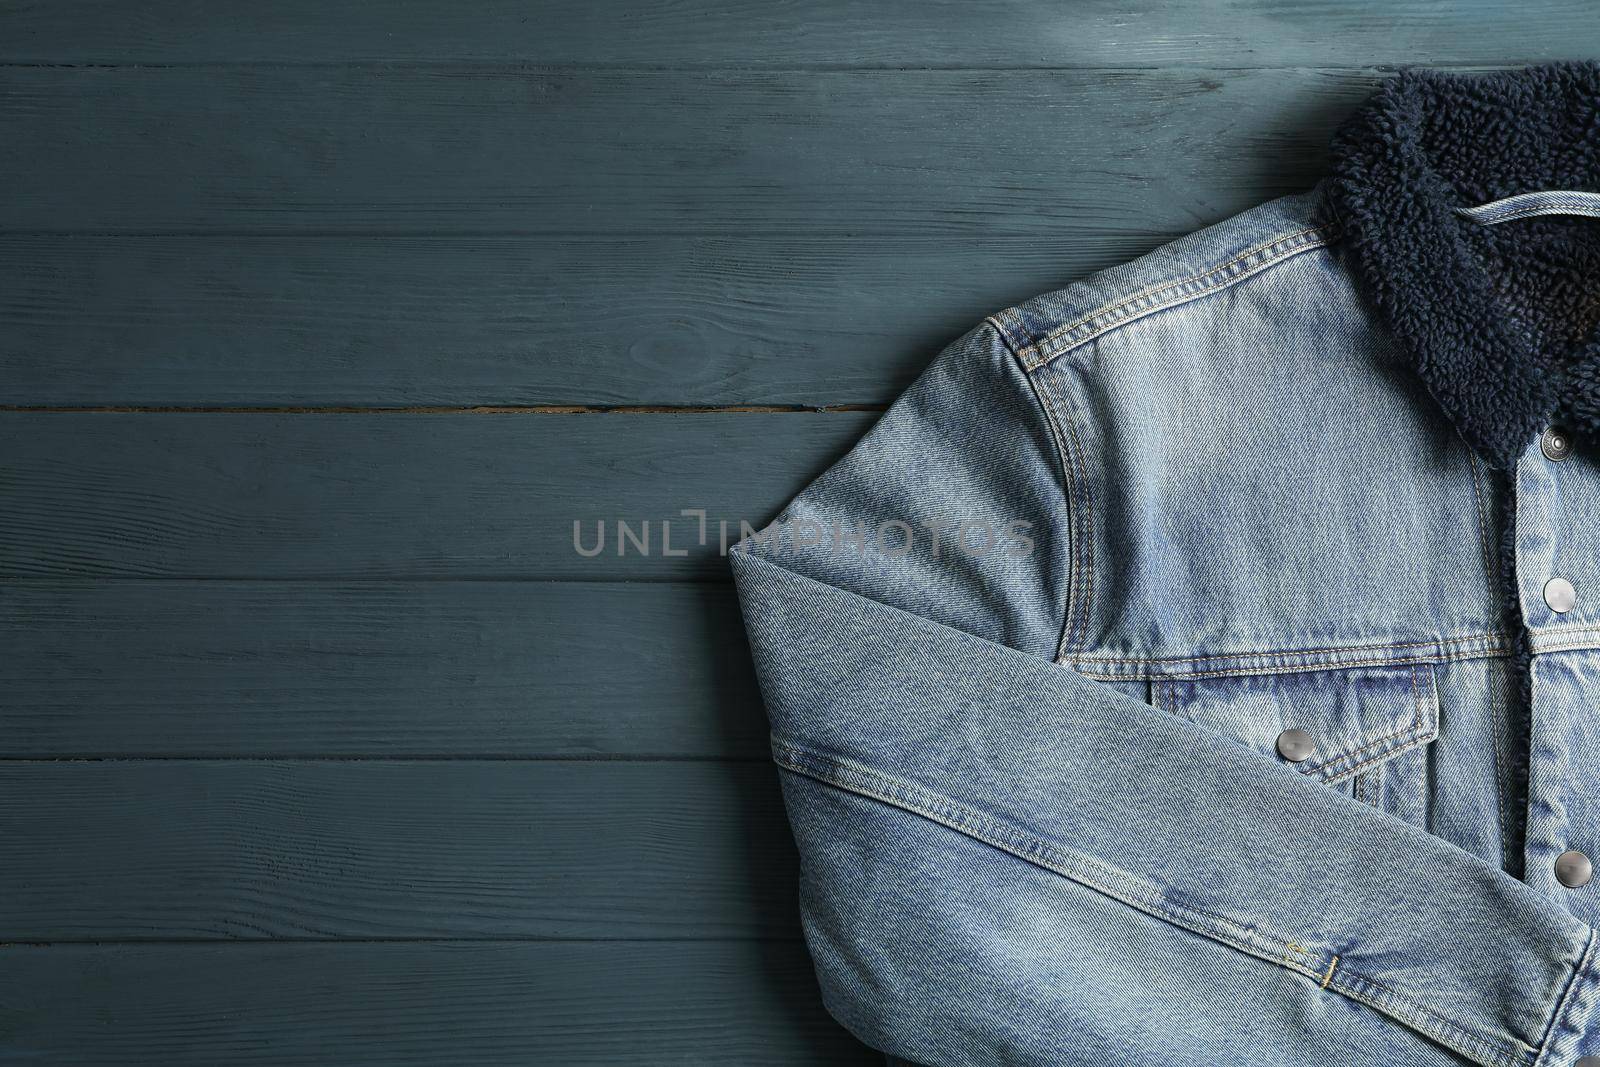 Denim jacket on wooden background, space for text Denim jacket on wooden background, space for text Denim jacket on wooden background, space for text by AtlasCompany